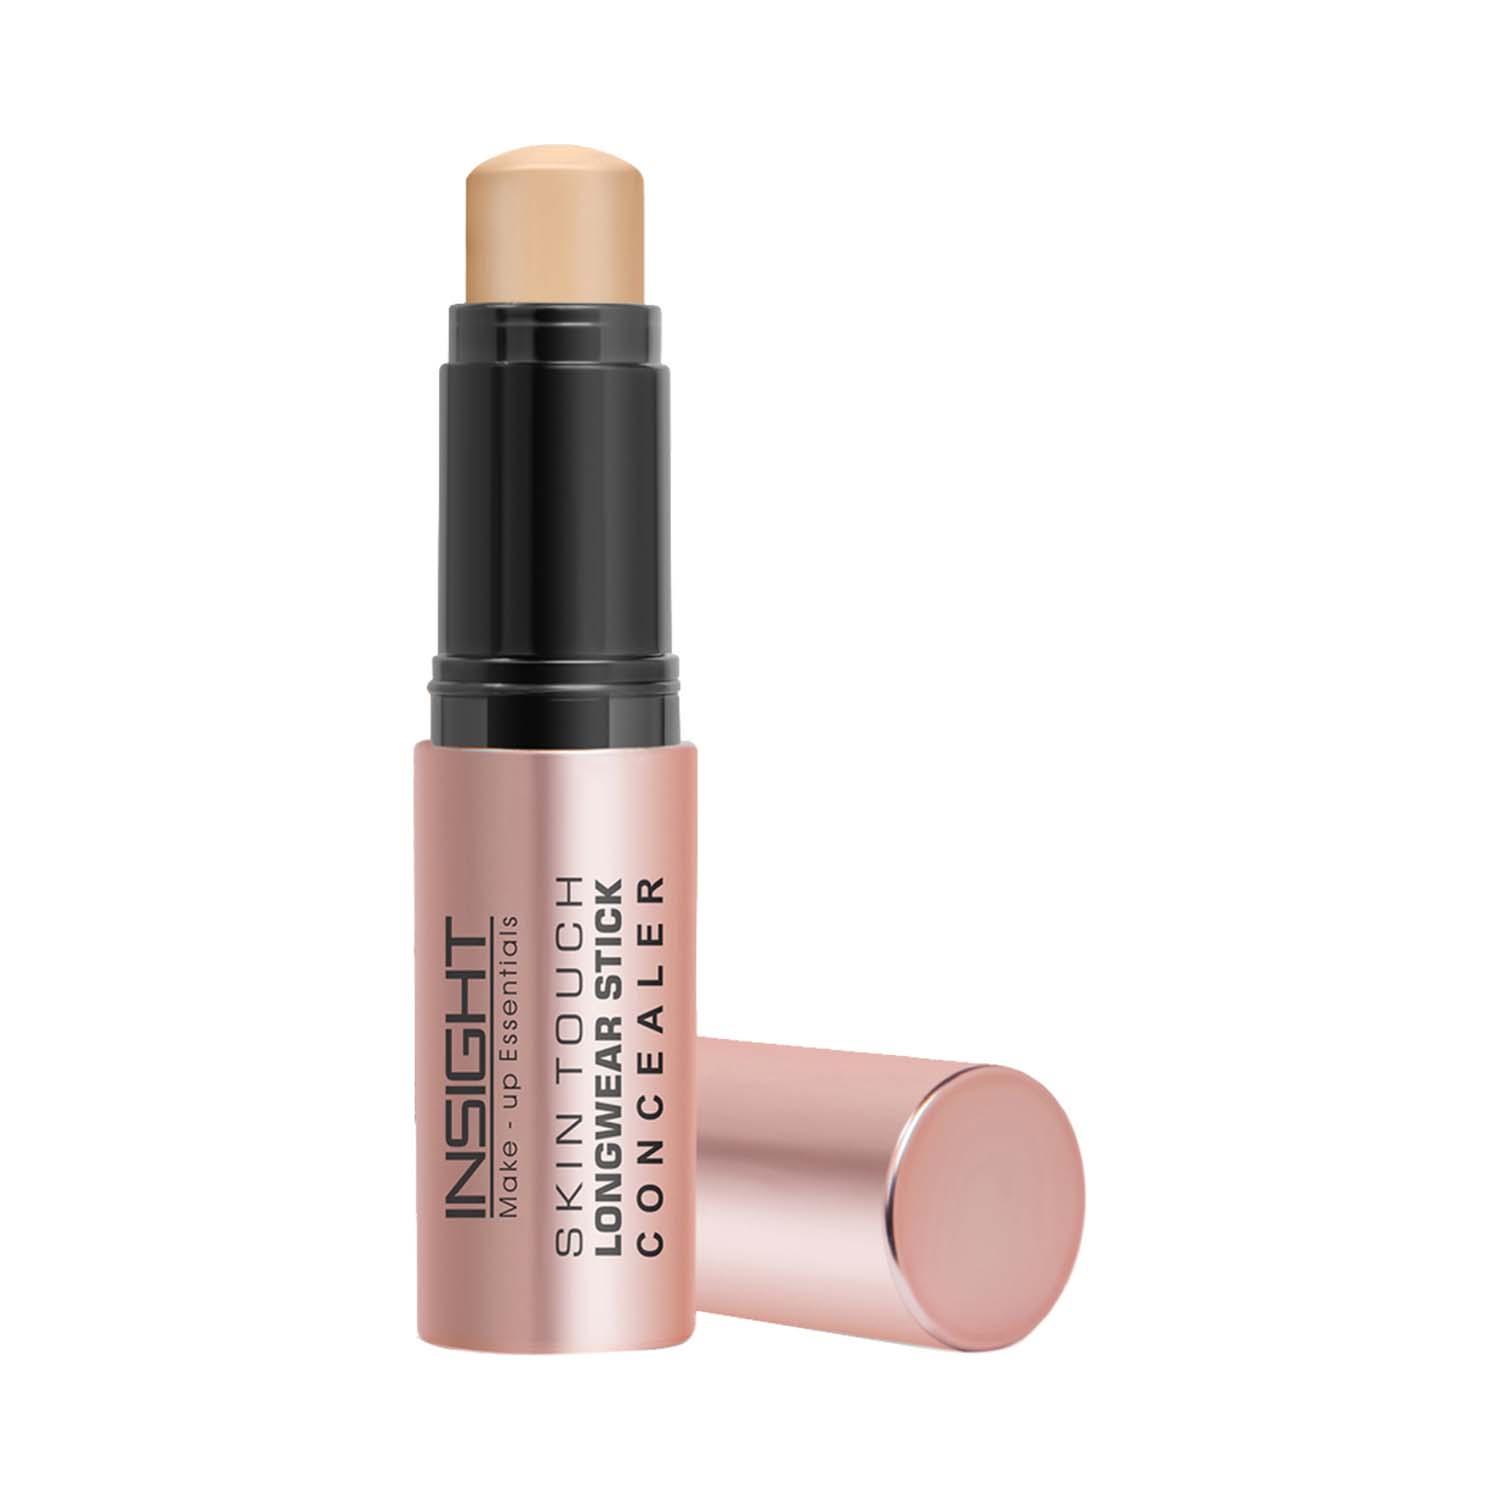 Insight Cosmetics | Insight Cosmetics Skin Touch Longwear Concealer - MN16 (5 g)